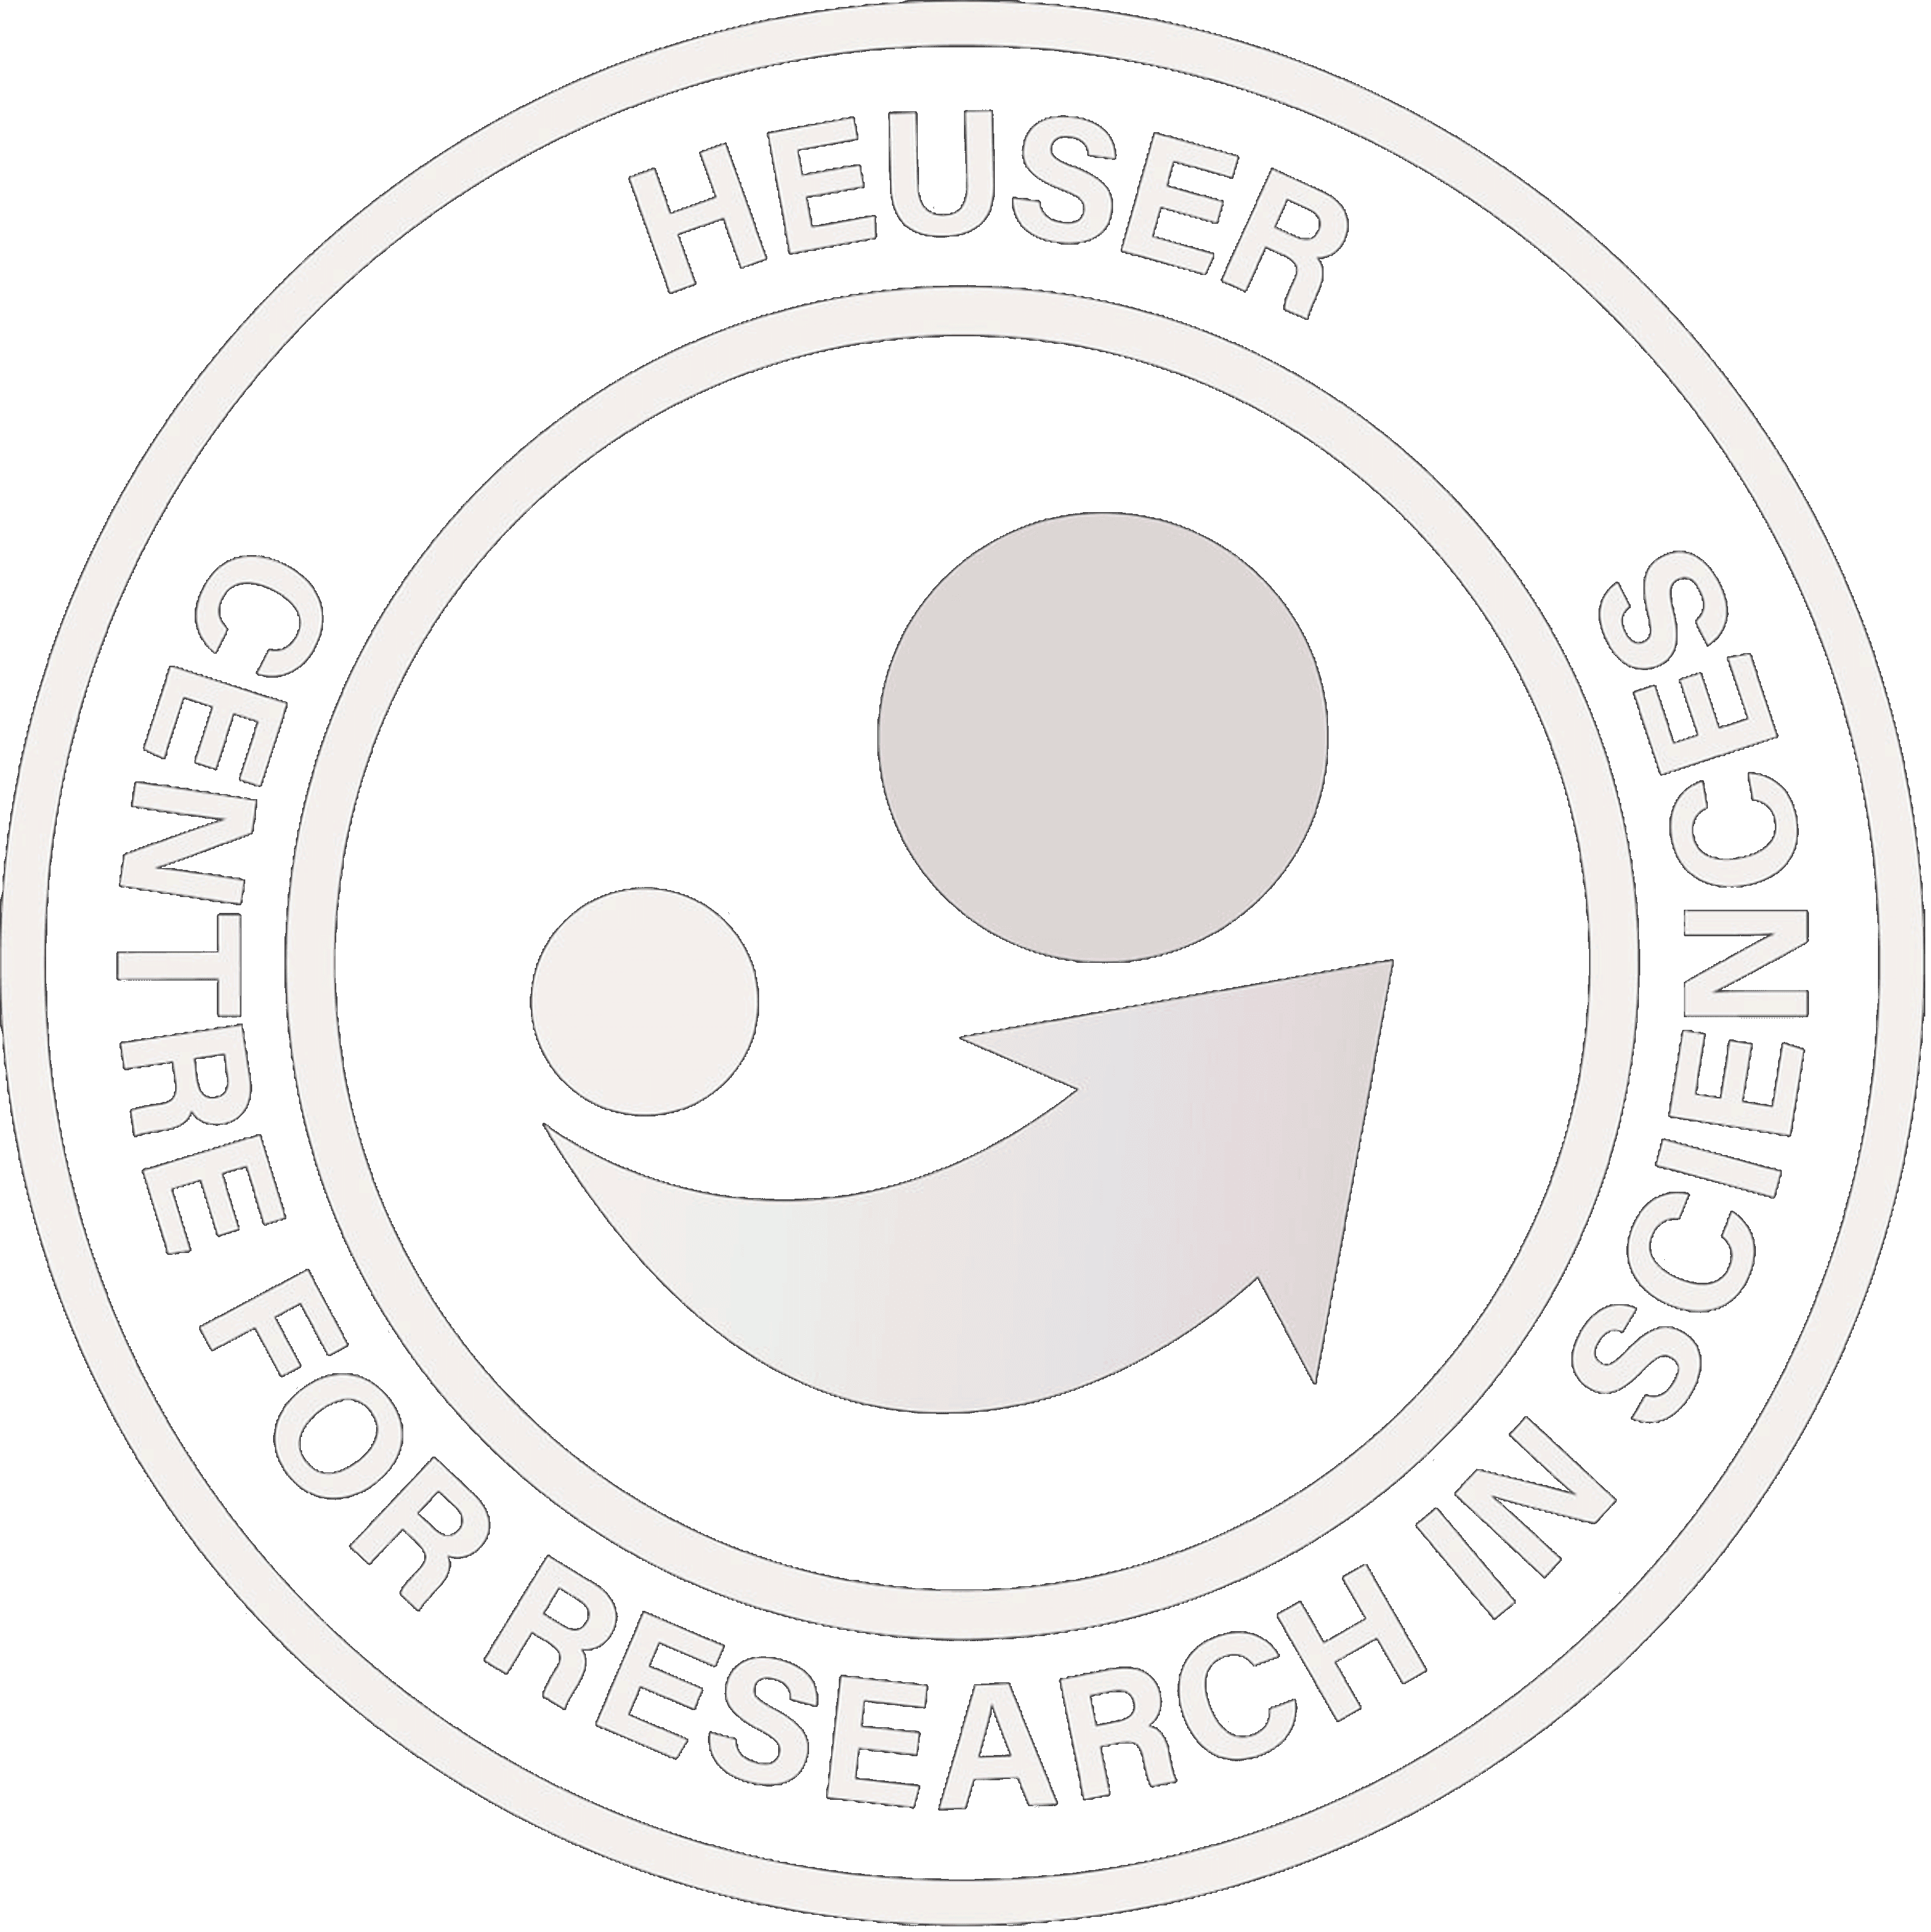 Courses/Programs At Heuser